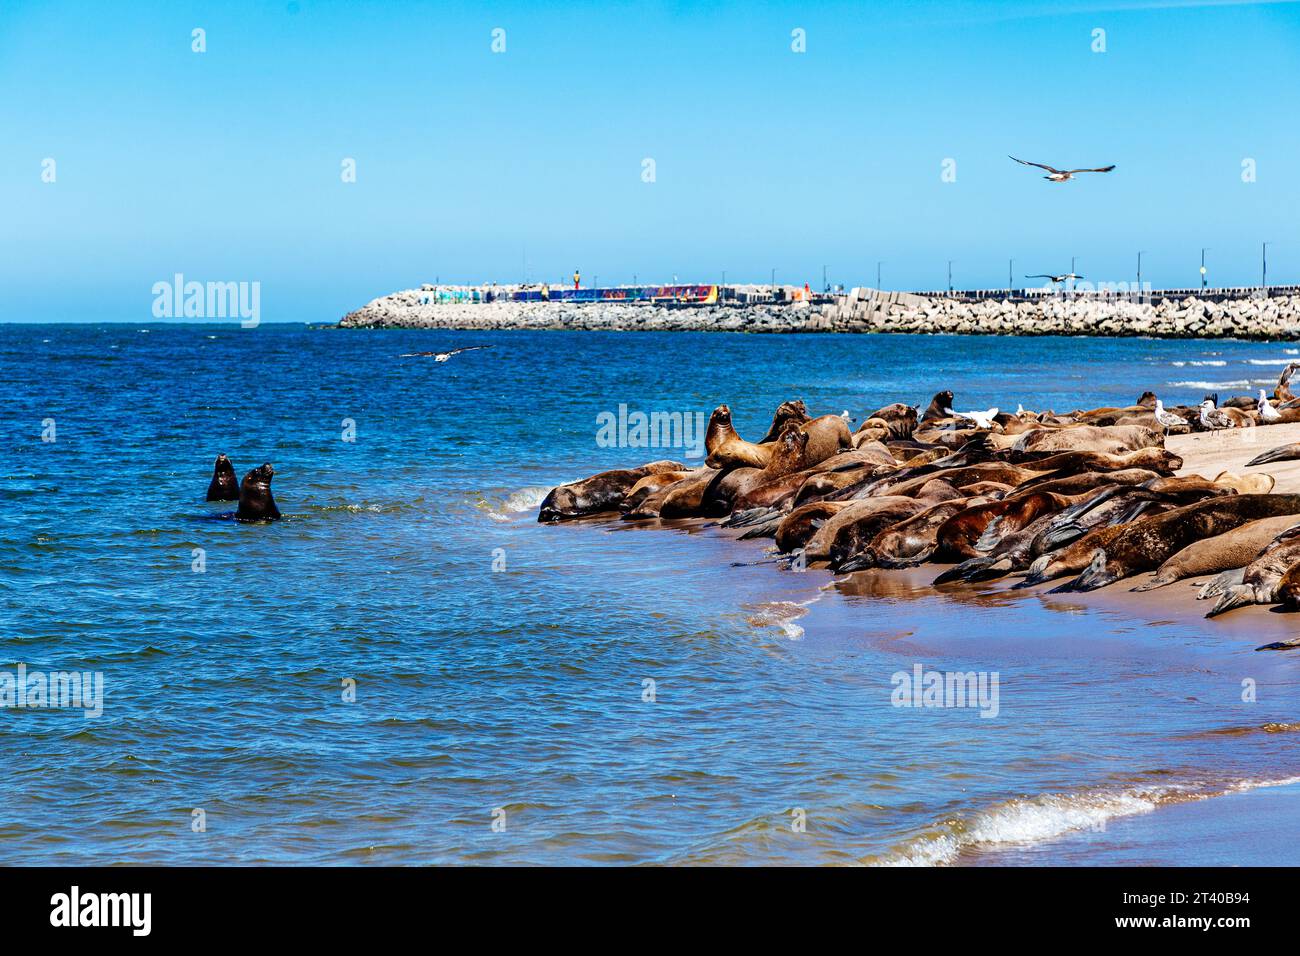 Many sea lions are on the beach next to the Necochea harbor in Argentina. Stock Photo